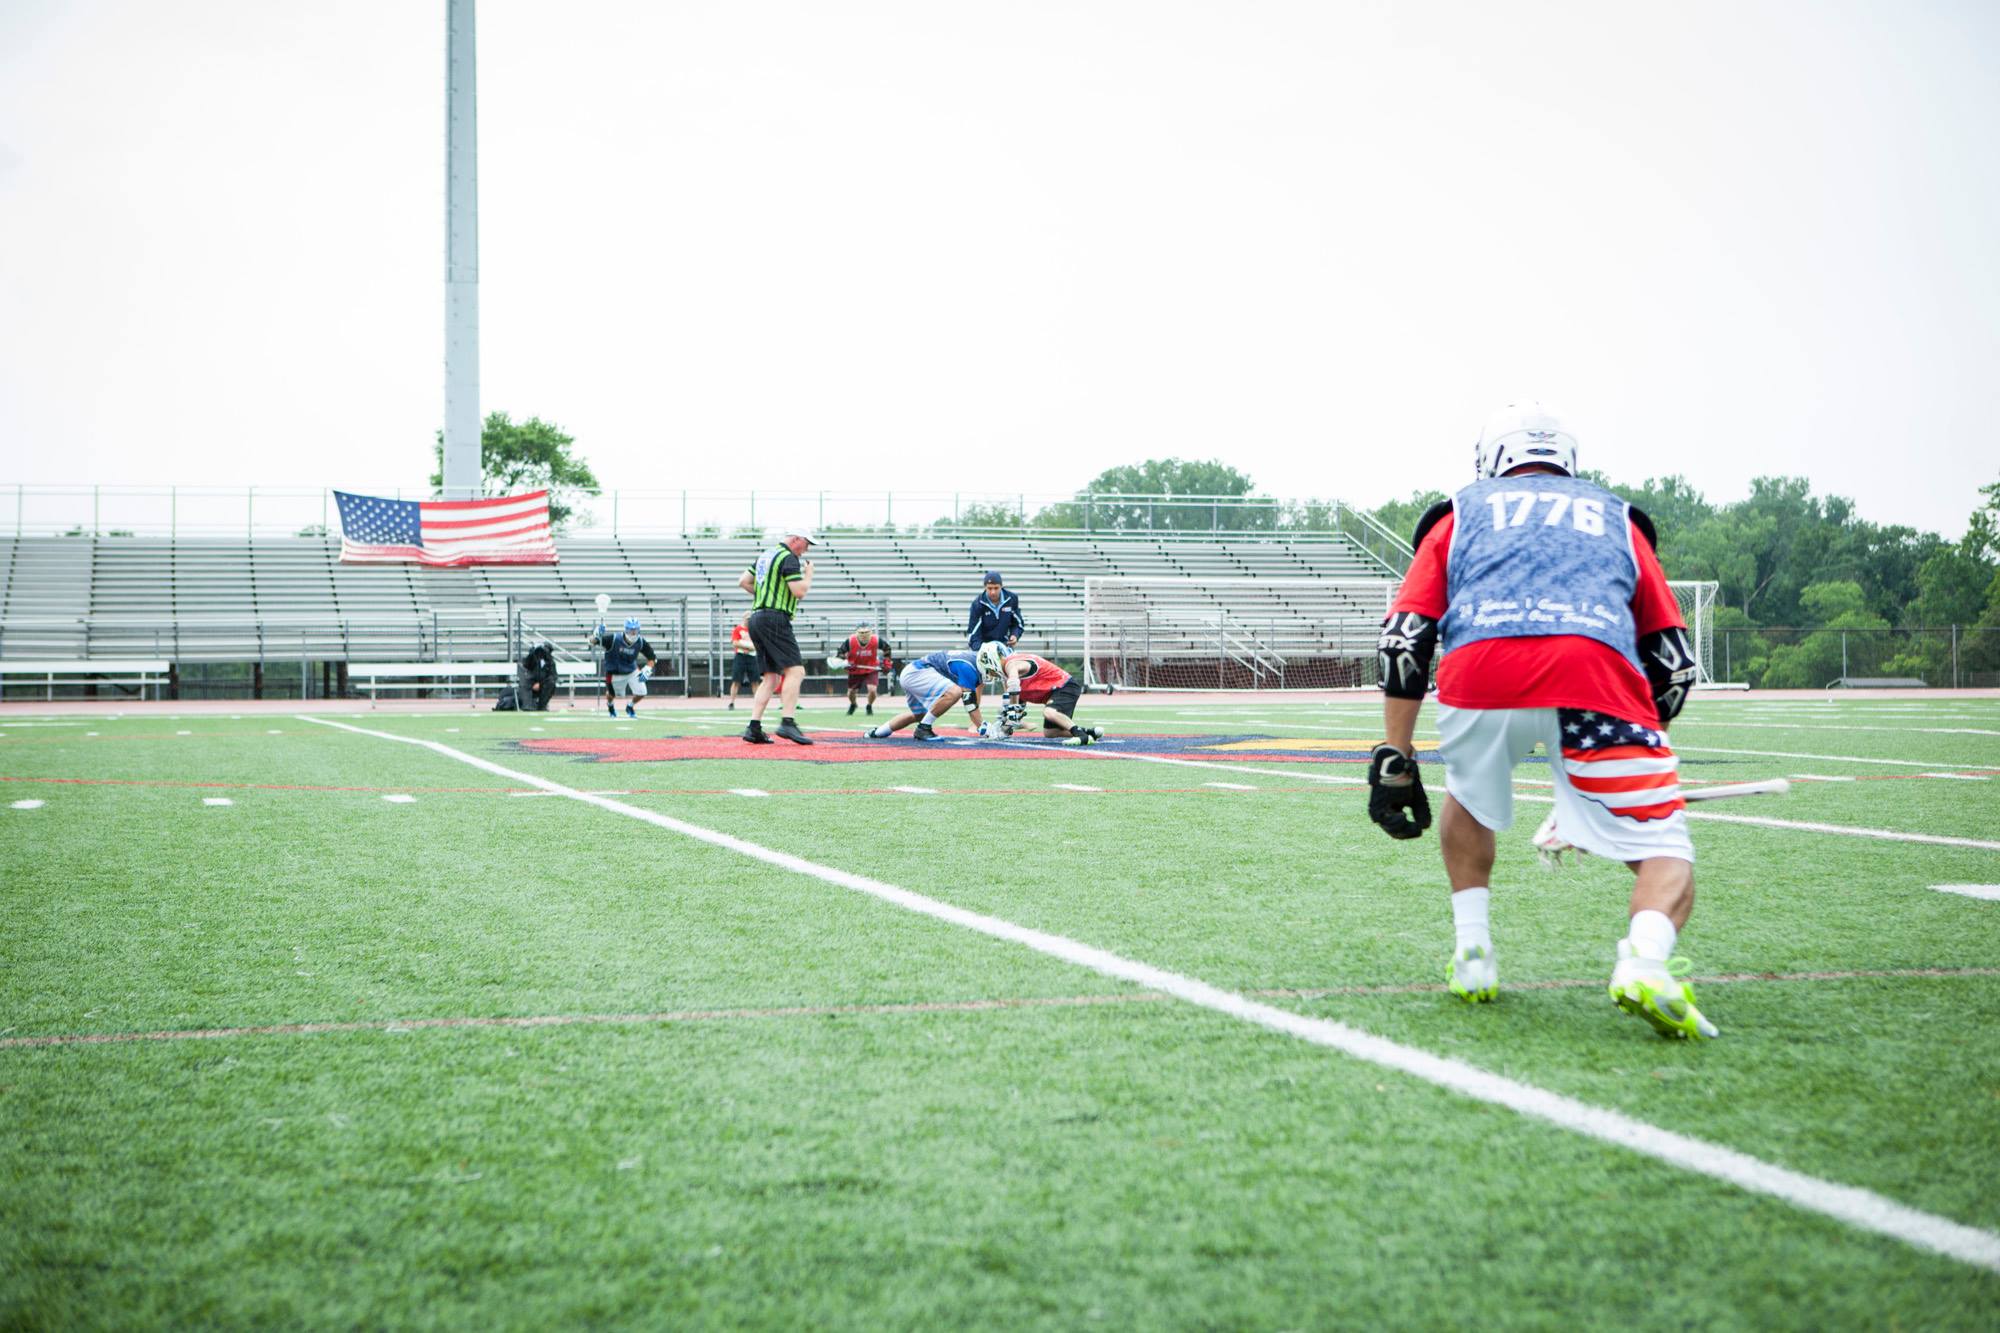 Shootout for Soldiers Ohio Exceeds “Highest Expectations”  |Shootout for Soldiers Ohio